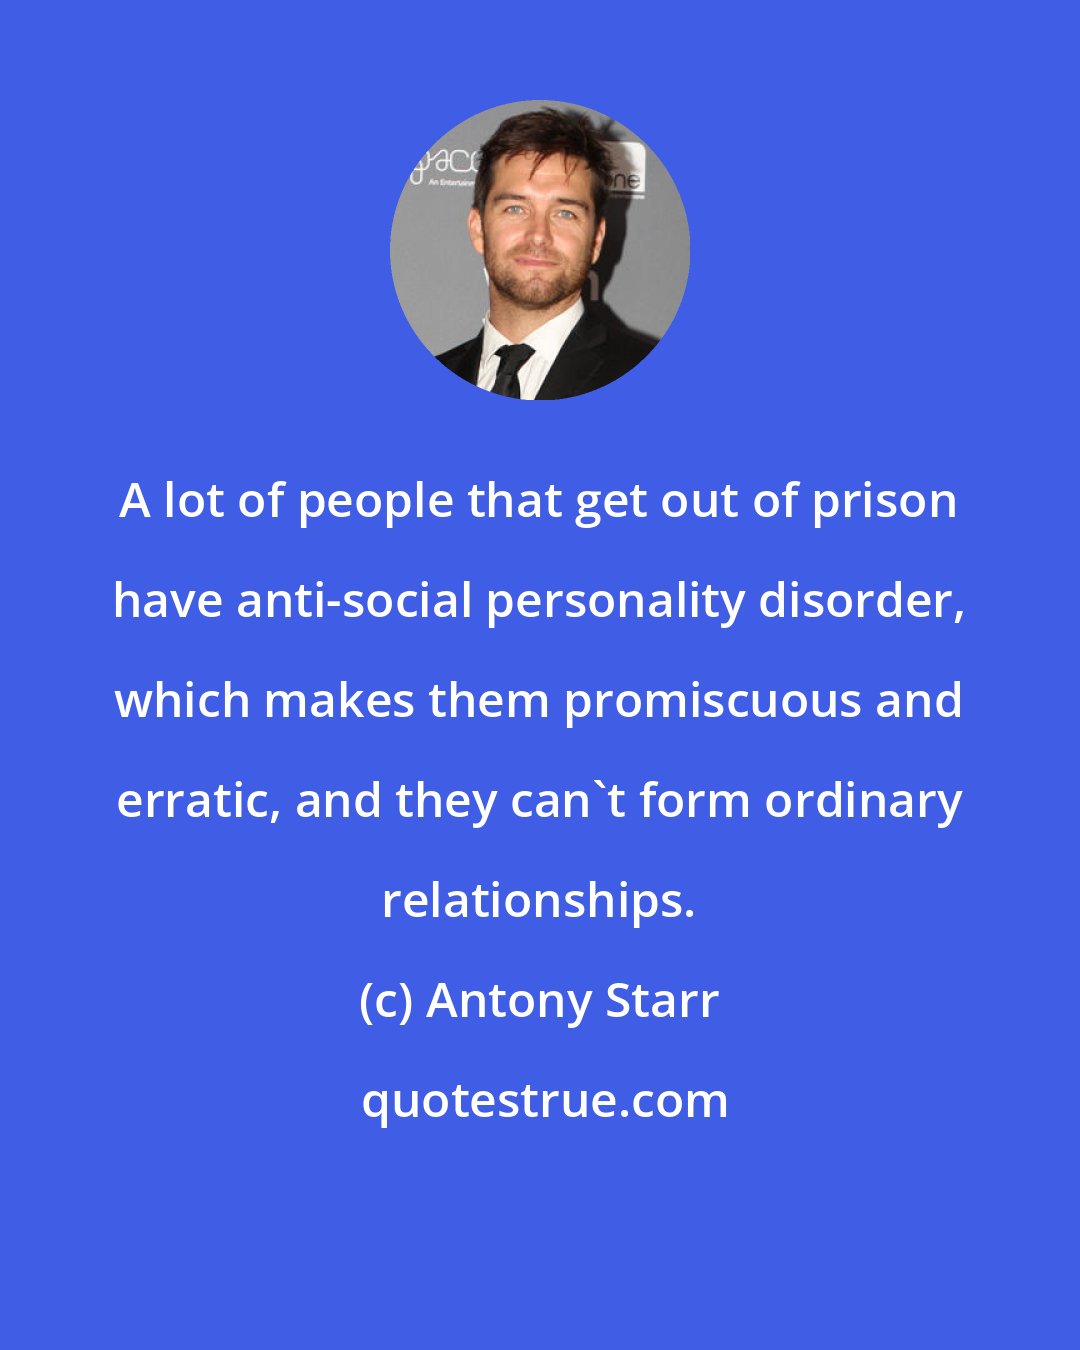 Antony Starr: A lot of people that get out of prison have anti-social personality disorder, which makes them promiscuous and erratic, and they can't form ordinary relationships.